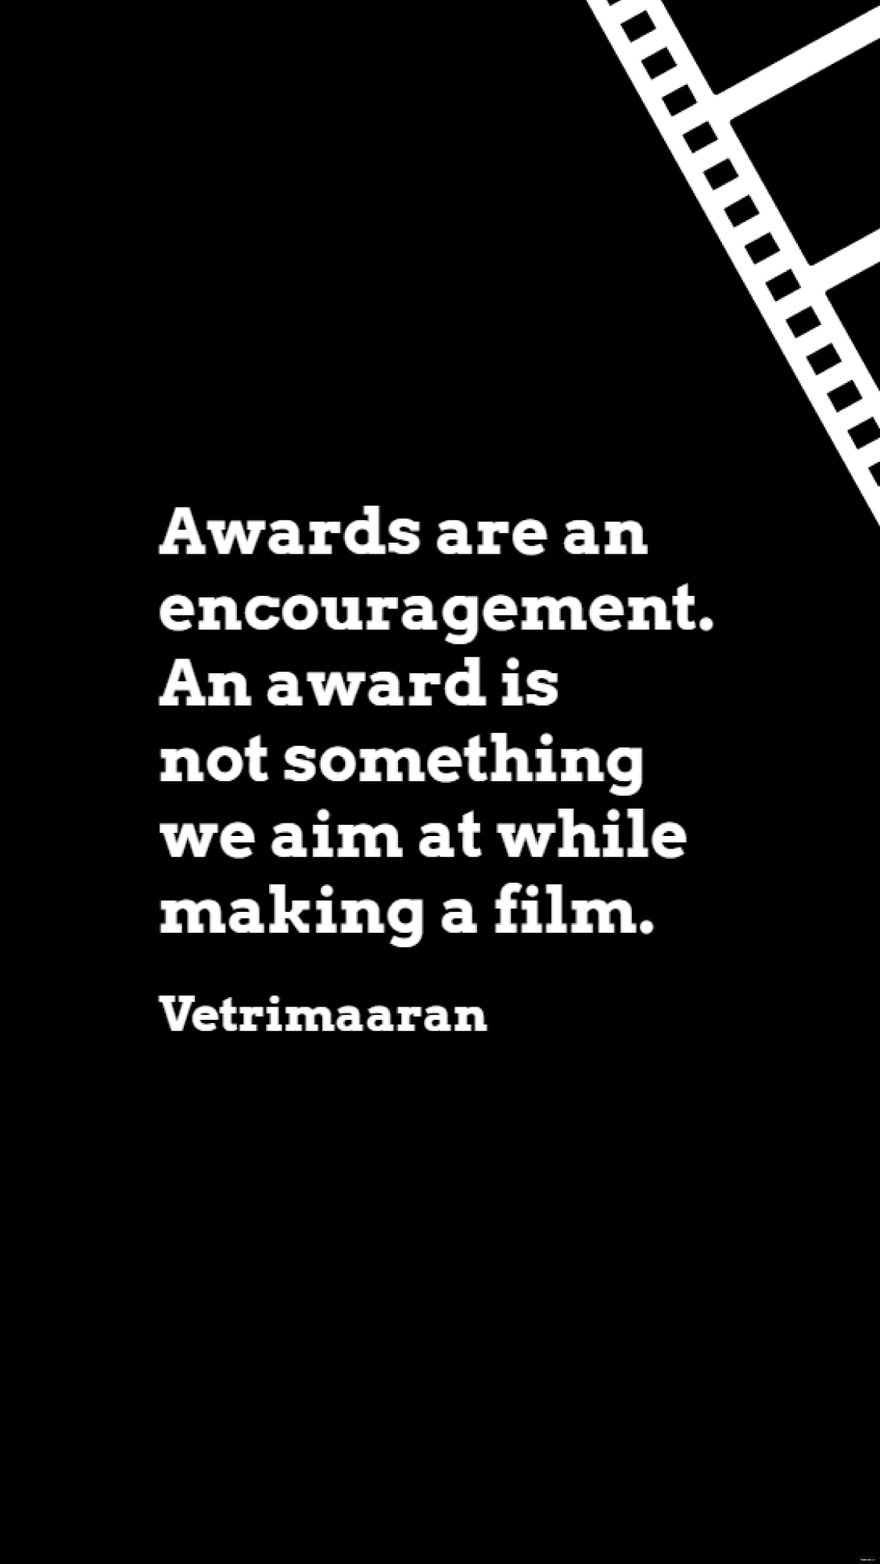 Free Vetrimaaran - Awards are an encouragement. An award is not something we aim at while making a film. in JPG